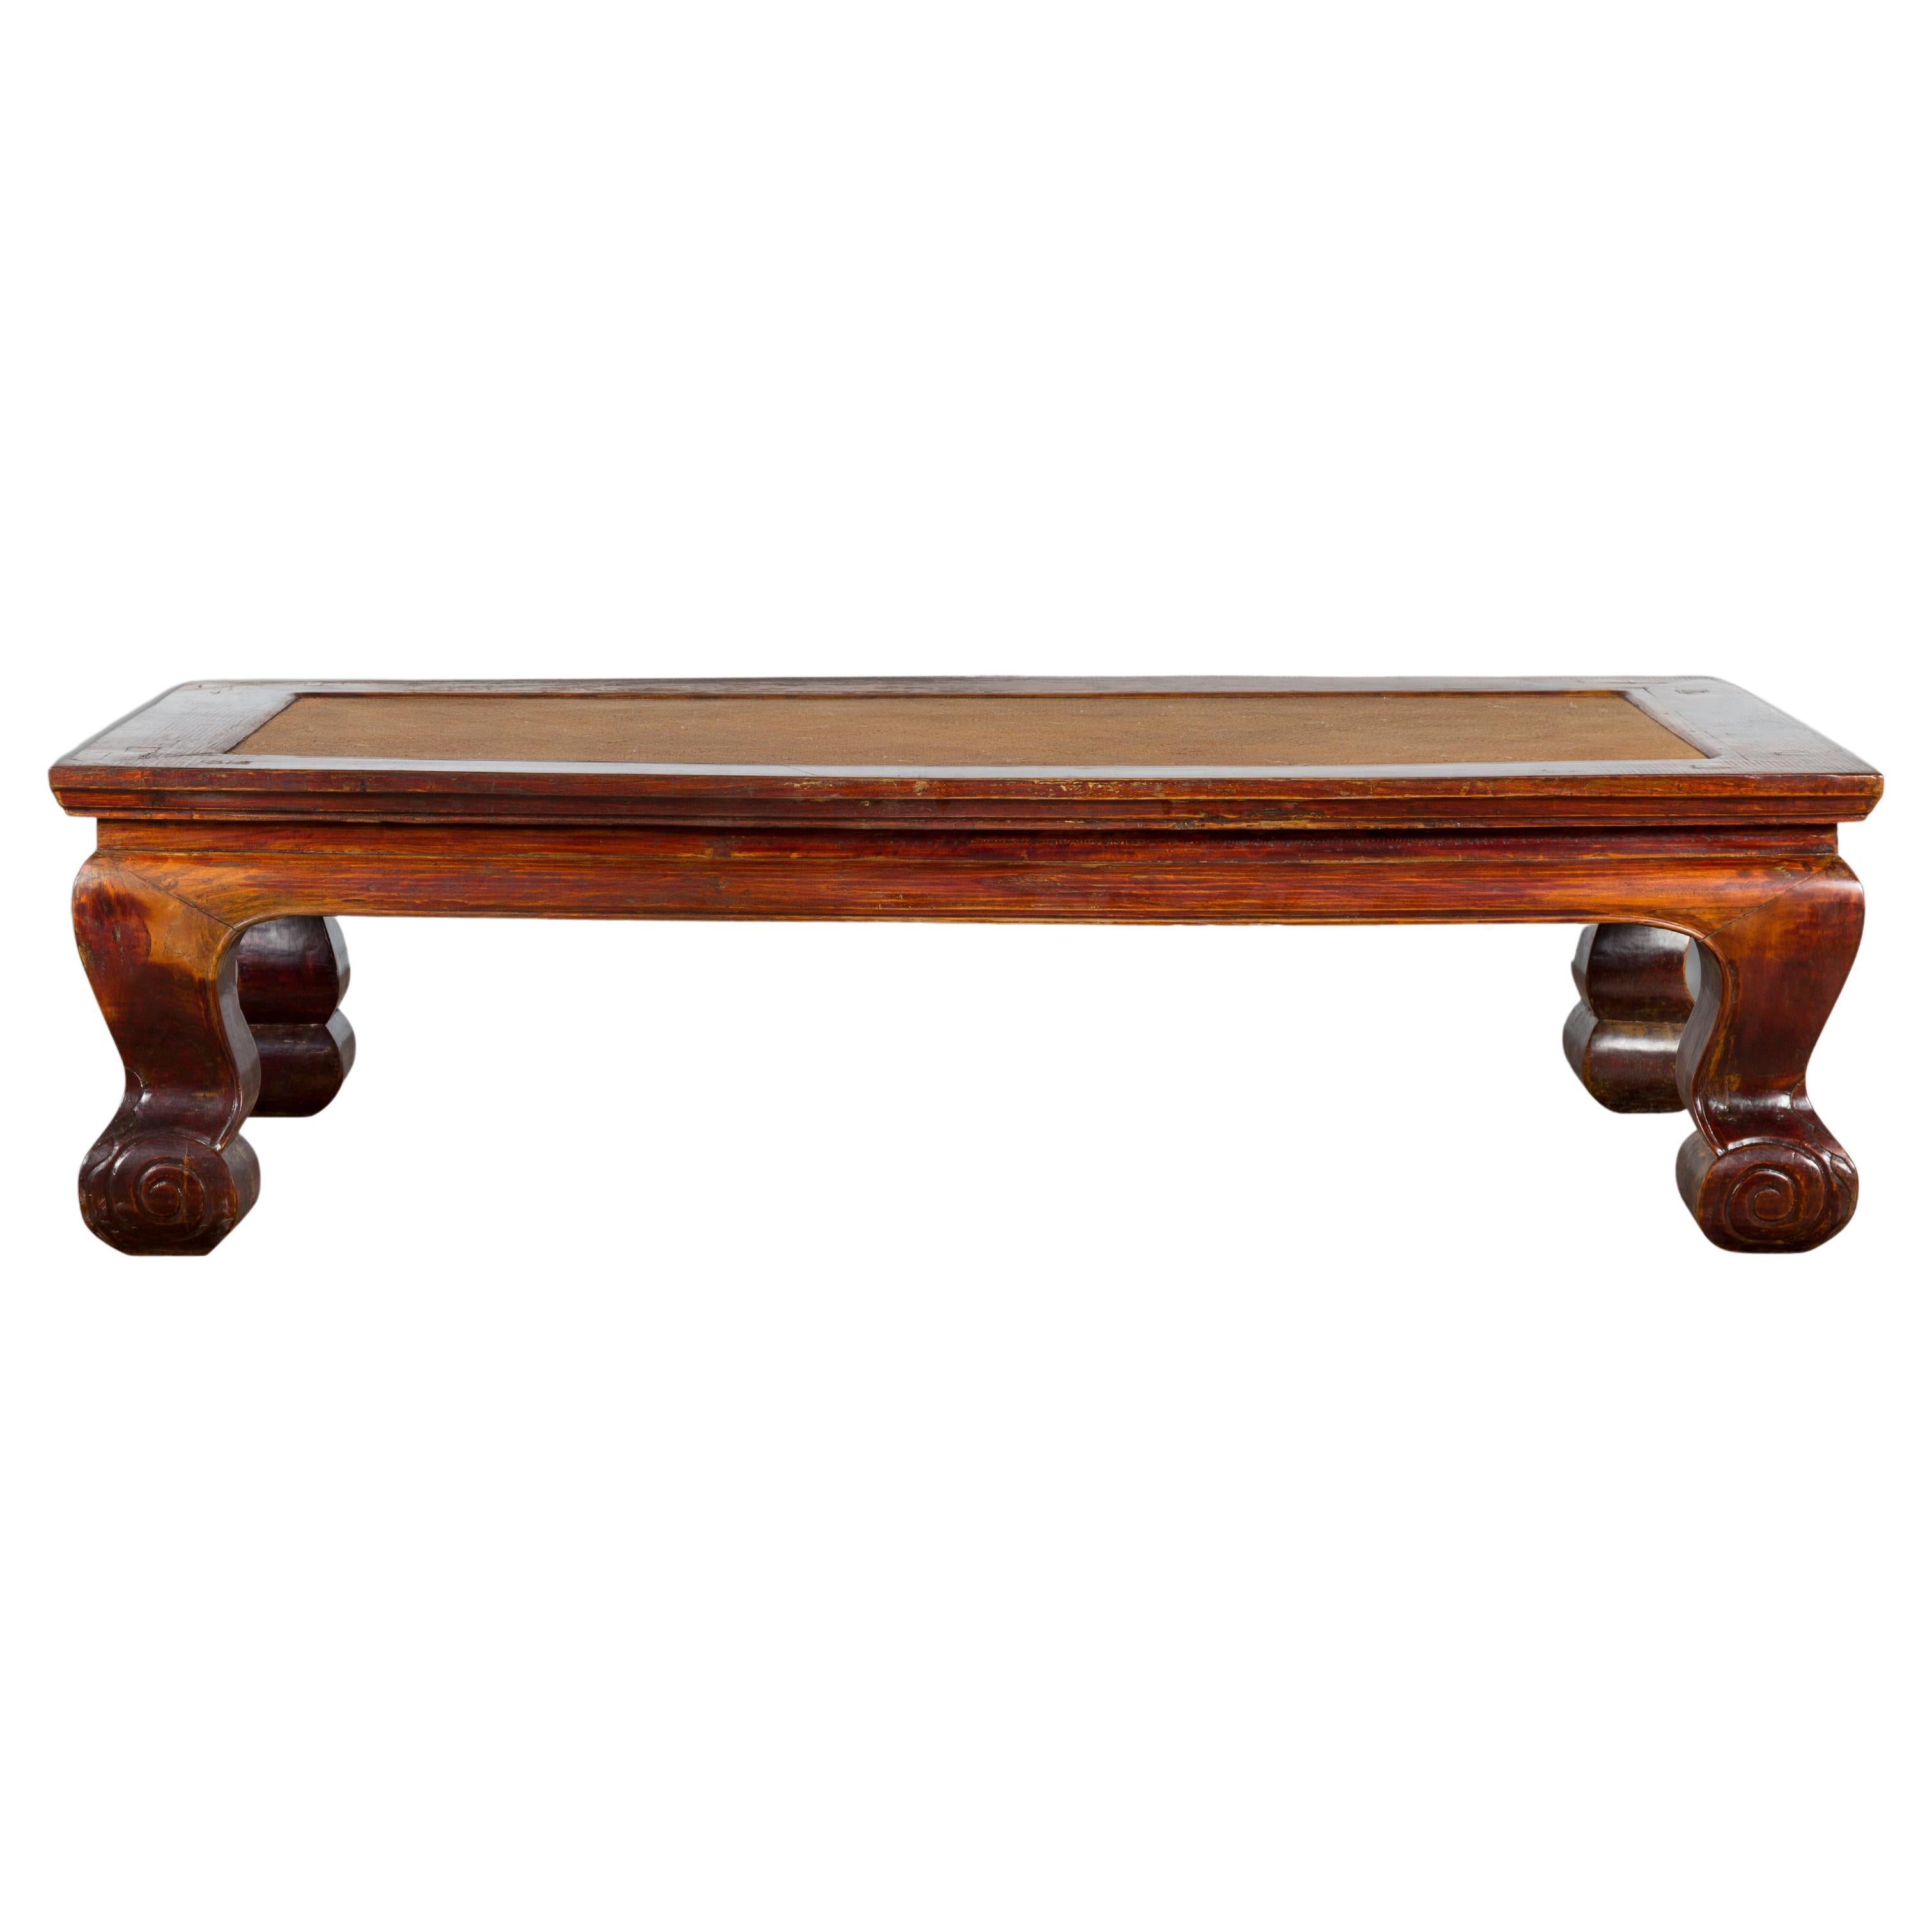 Chinese Qing Dynasty Period 19th Century Elm Coffee Table with Rattan Top For Sale